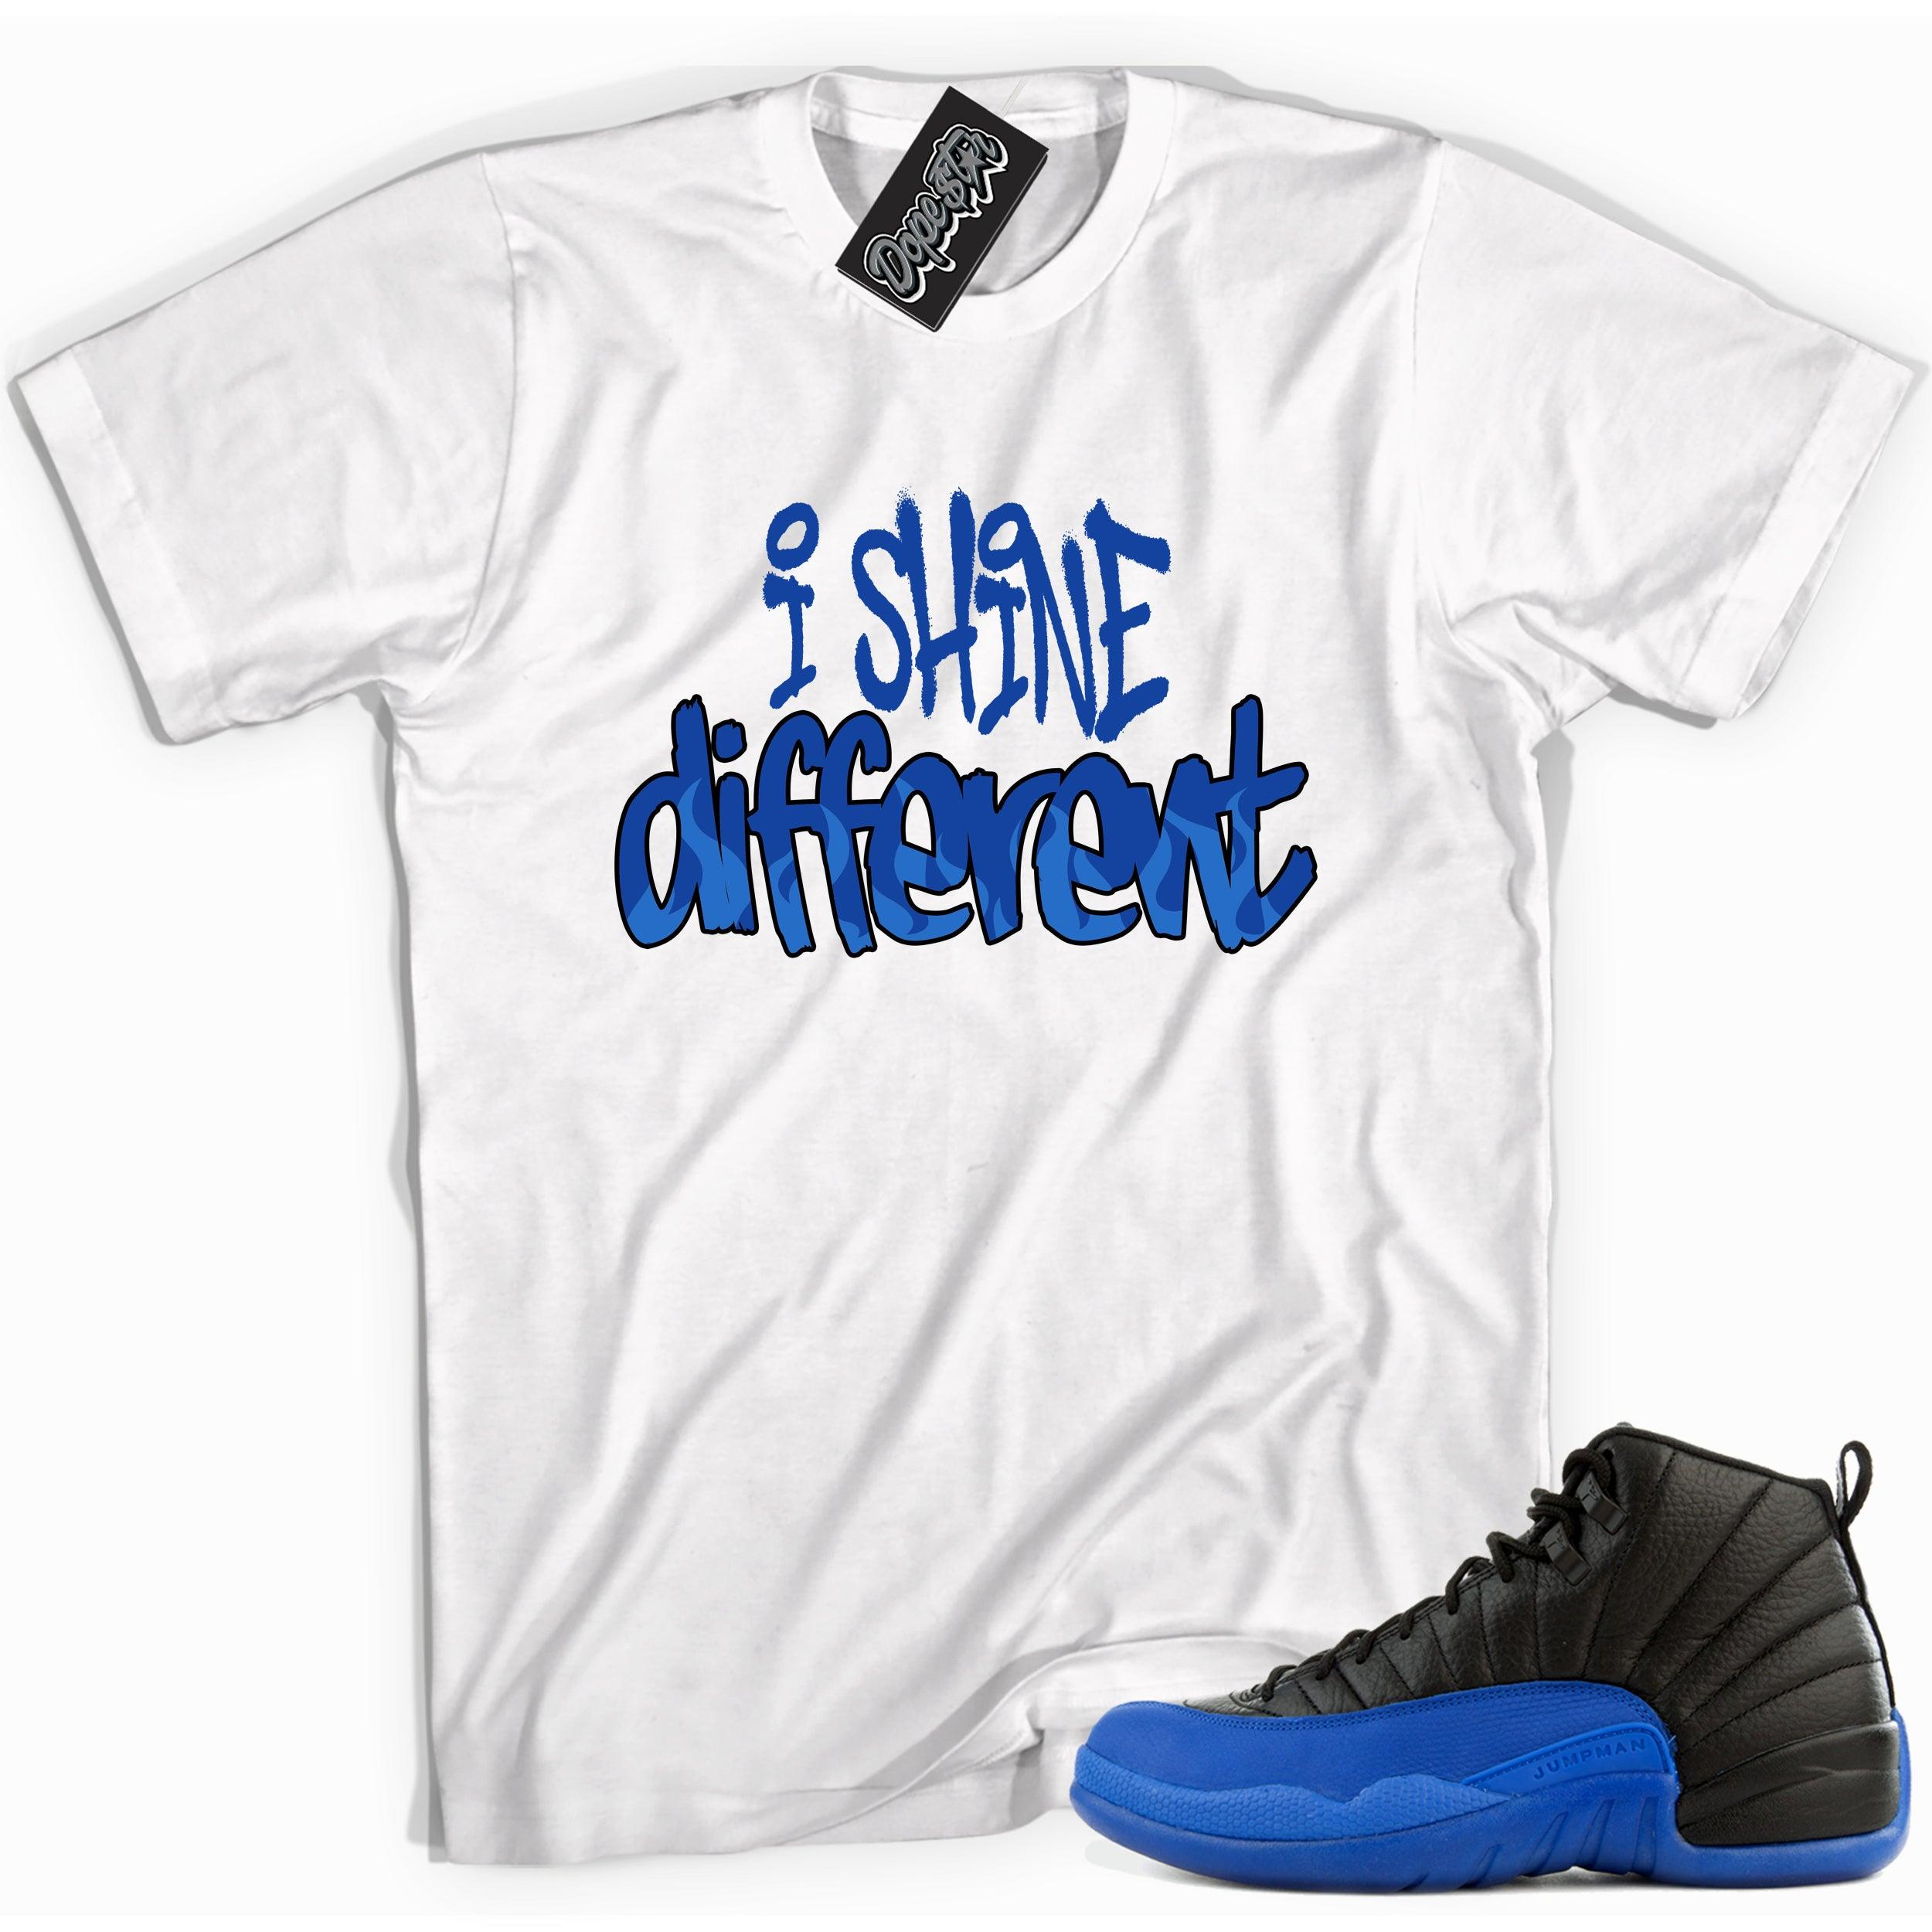 Cool white graphic tee with 'i shine different' print, that perfectly matches Air Jordan 12 Retro Black Game Royal sneakers.